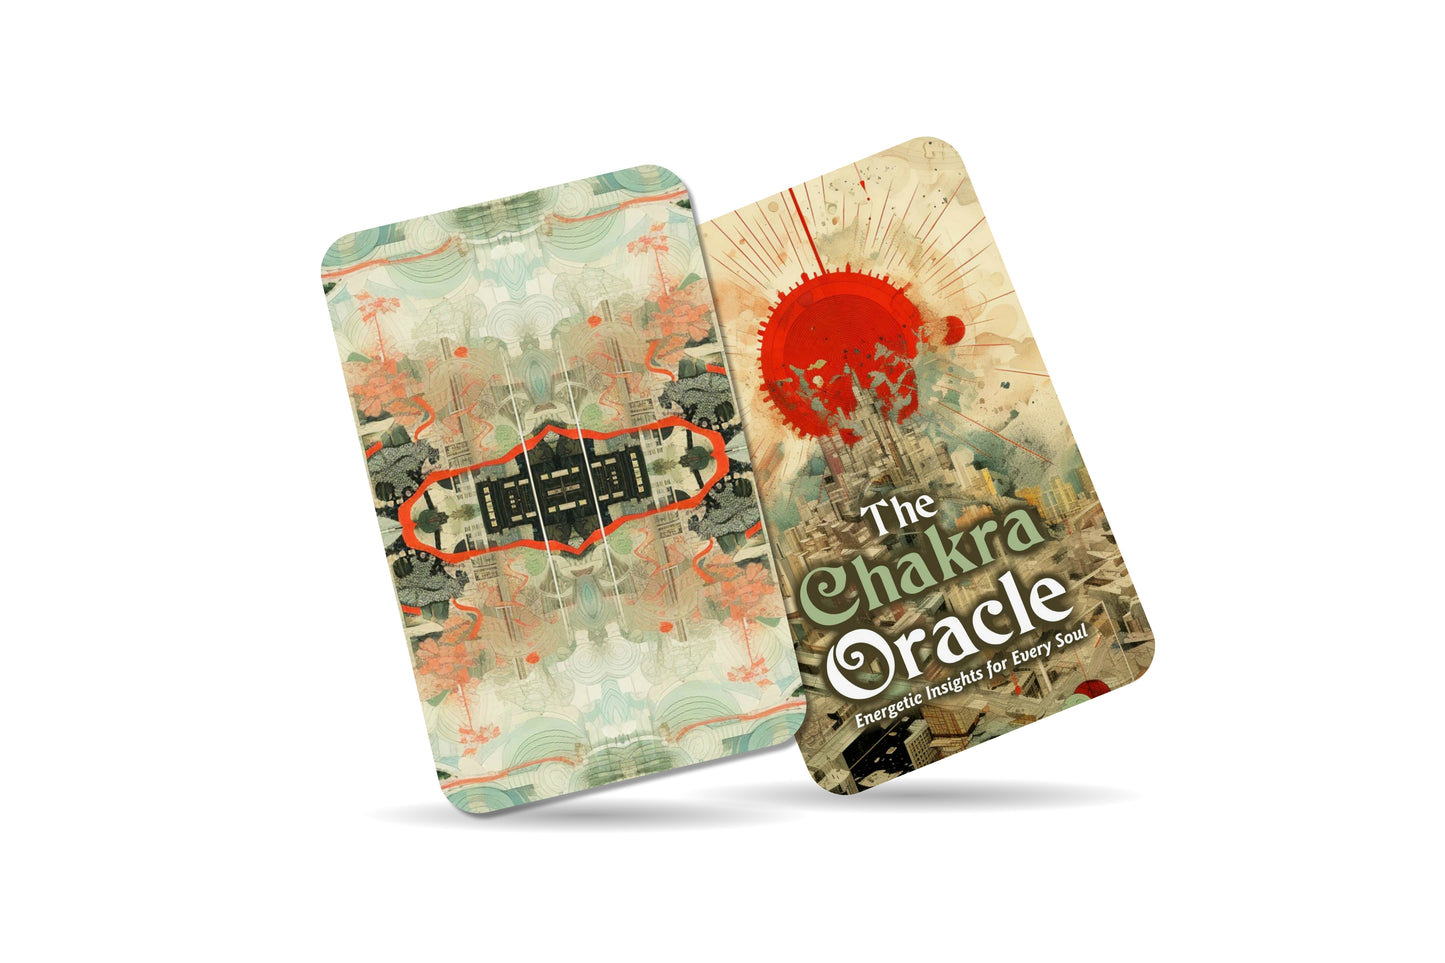 The Chakra Oracle - Energetic Insight For Every Soul